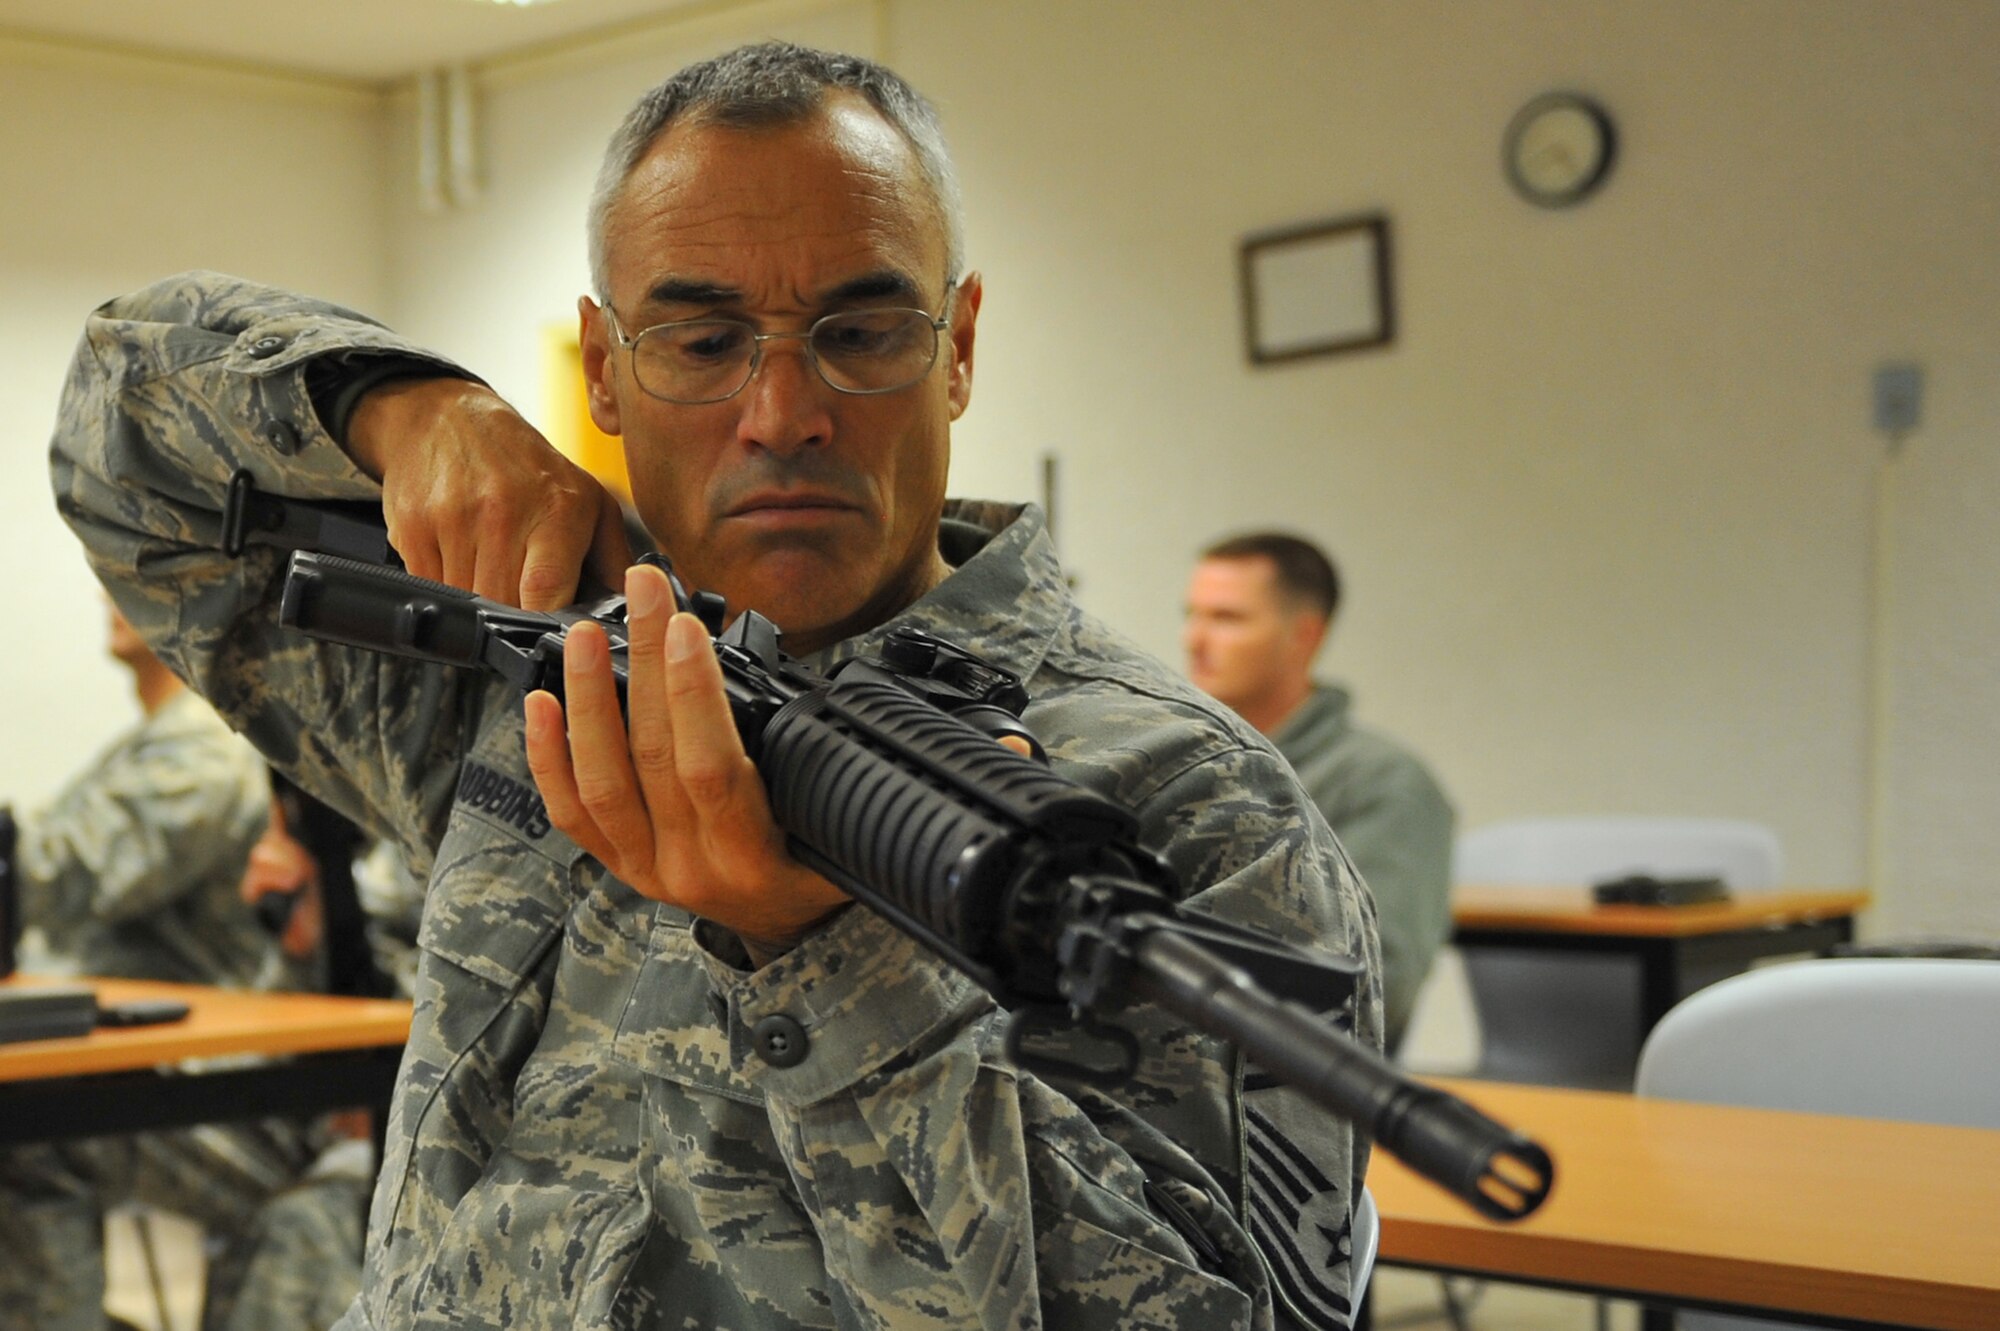 SPANGDAHLEM AIR BASE, Germany – Chief Master Sgt. Scott Robbins, 606th Air Control Squadron chief enlisted manager, observes the chamber of an M-4 assault rifle during the new weapons training and qualifications class here Oct. 13. Air Force leadership modernized the rifle qualification course by adding movement while engaging targets to better train and equip Airmen for today’s fight. Spangdahlem AB is the first base in United States Air Forces in Europe to initiate the new qualification course. (U.S. Air Force photo/Airman 1st Class Dillon Davis)